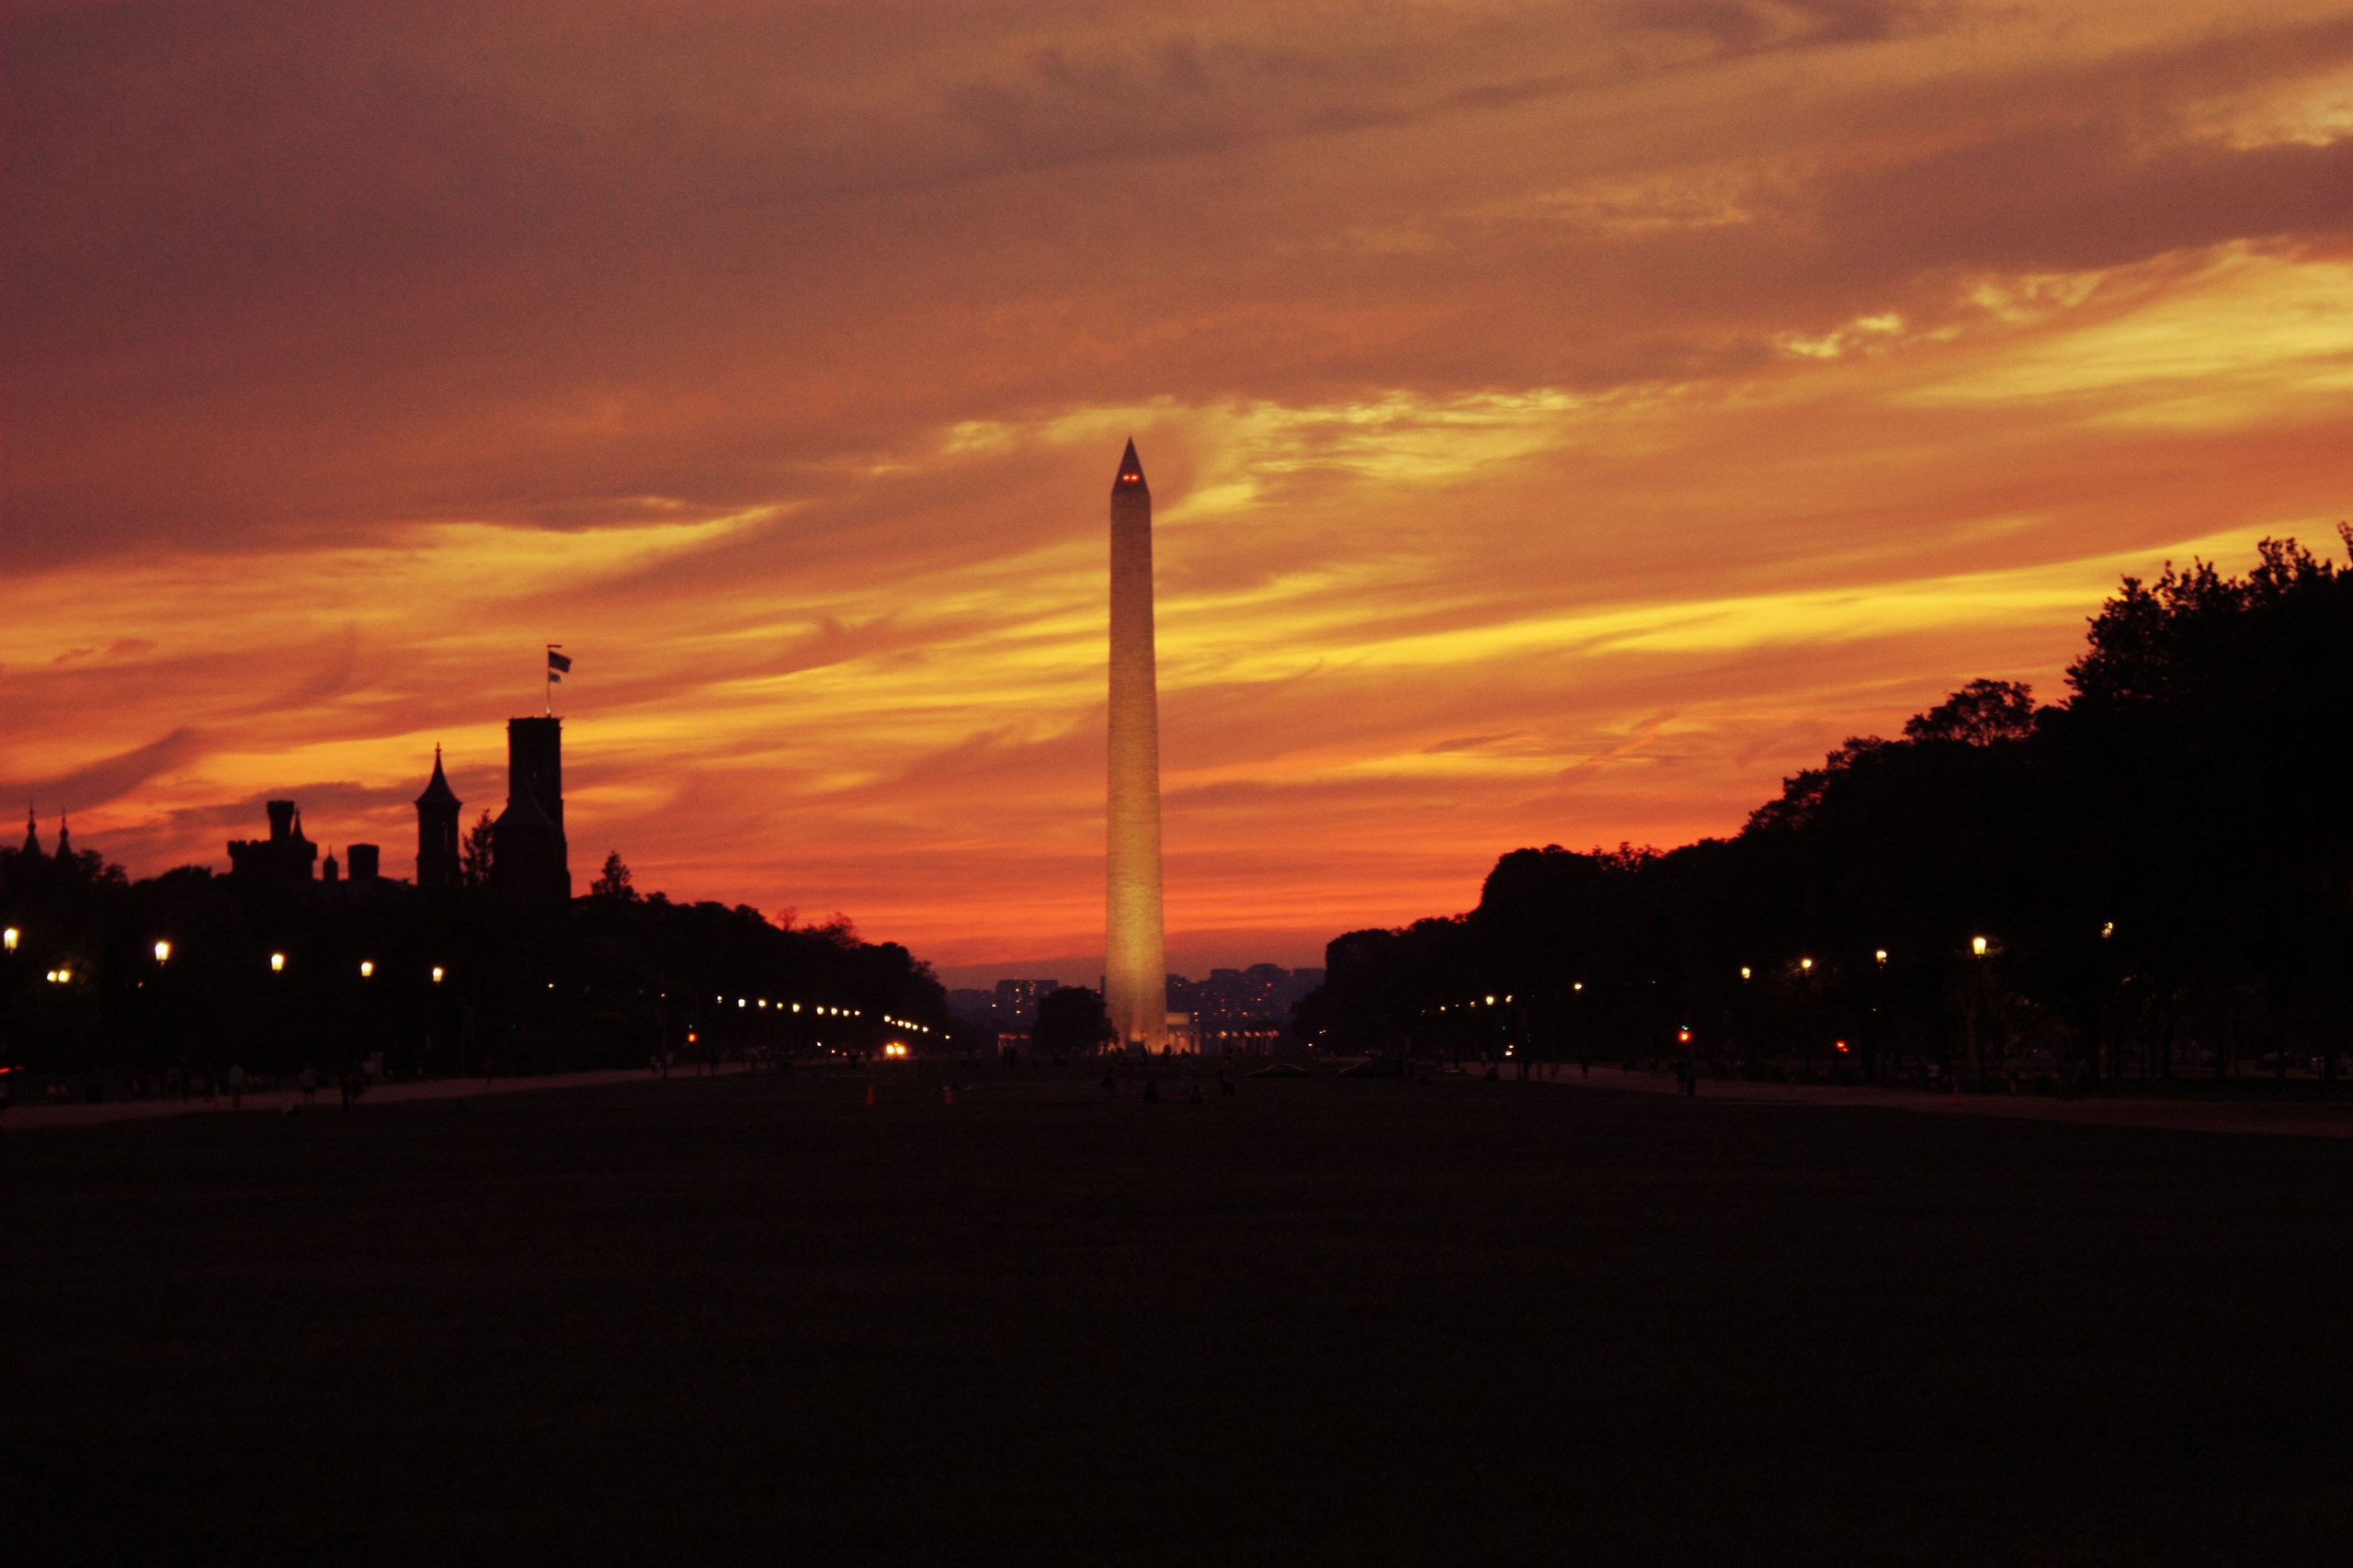  915269 Washington DC Wallpapers City Wallpapers Gallery   PC